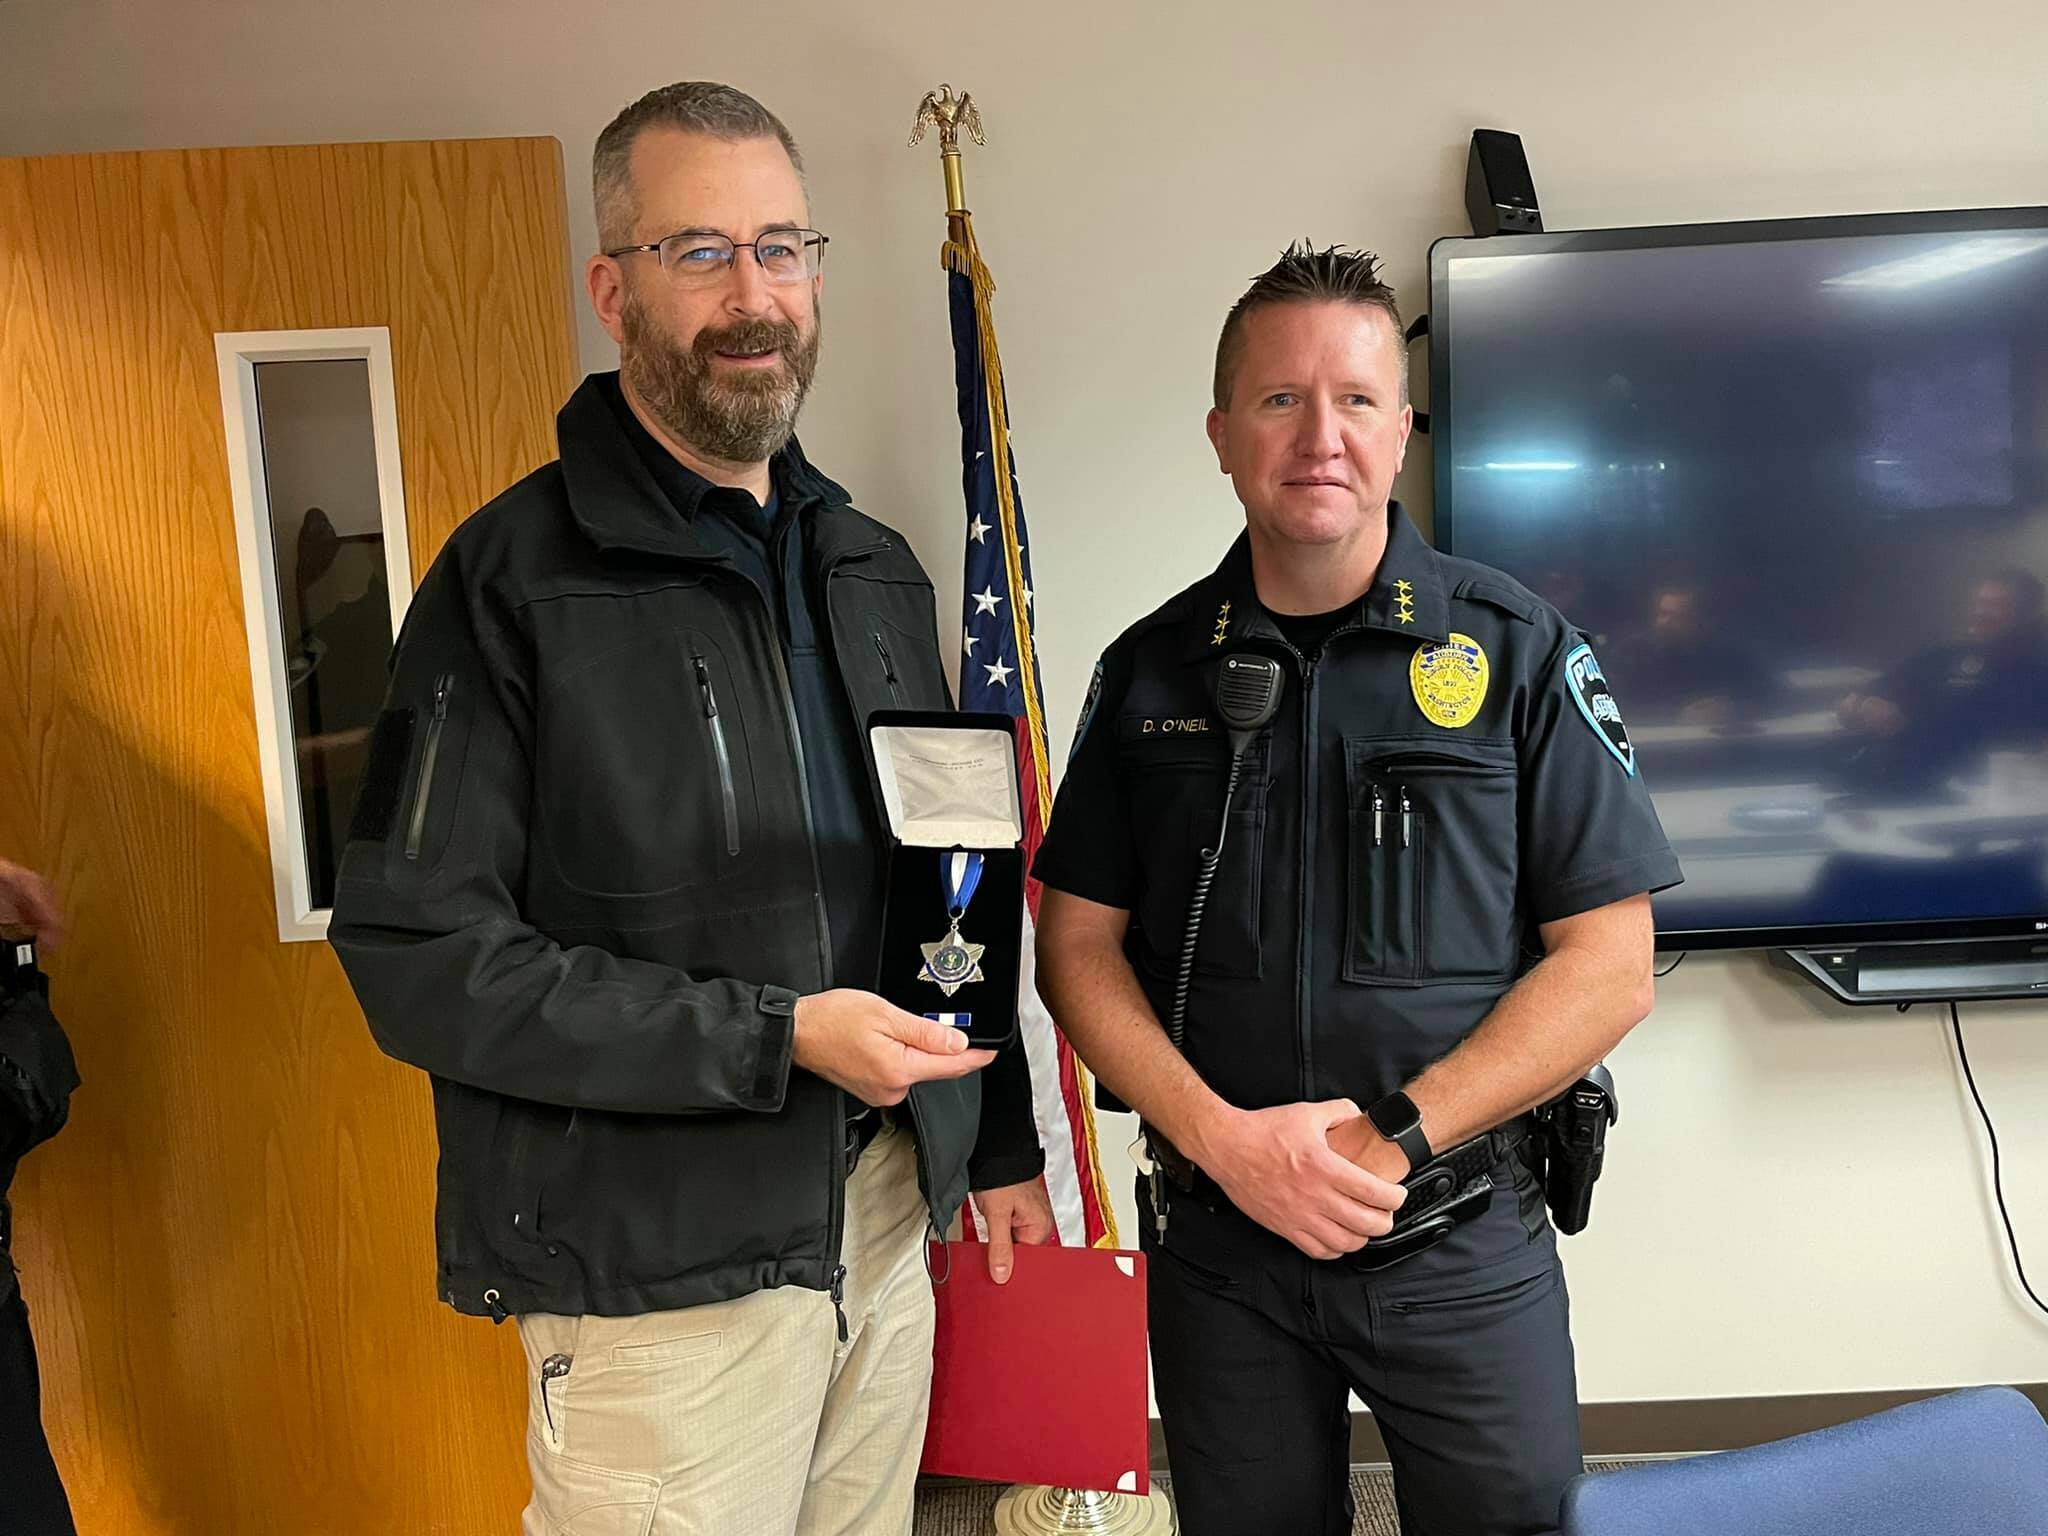 Auburn Police Detective Jon Postawa, left, receives the Auburn Police Department’s Lifesaving Medal from former Police Chief Dan O’Neil, given in recognition of his donation of a kidney to save the life of fellow Auburn Police Detective Damon Hewin. Photo courtesy of Auburn Police Department.